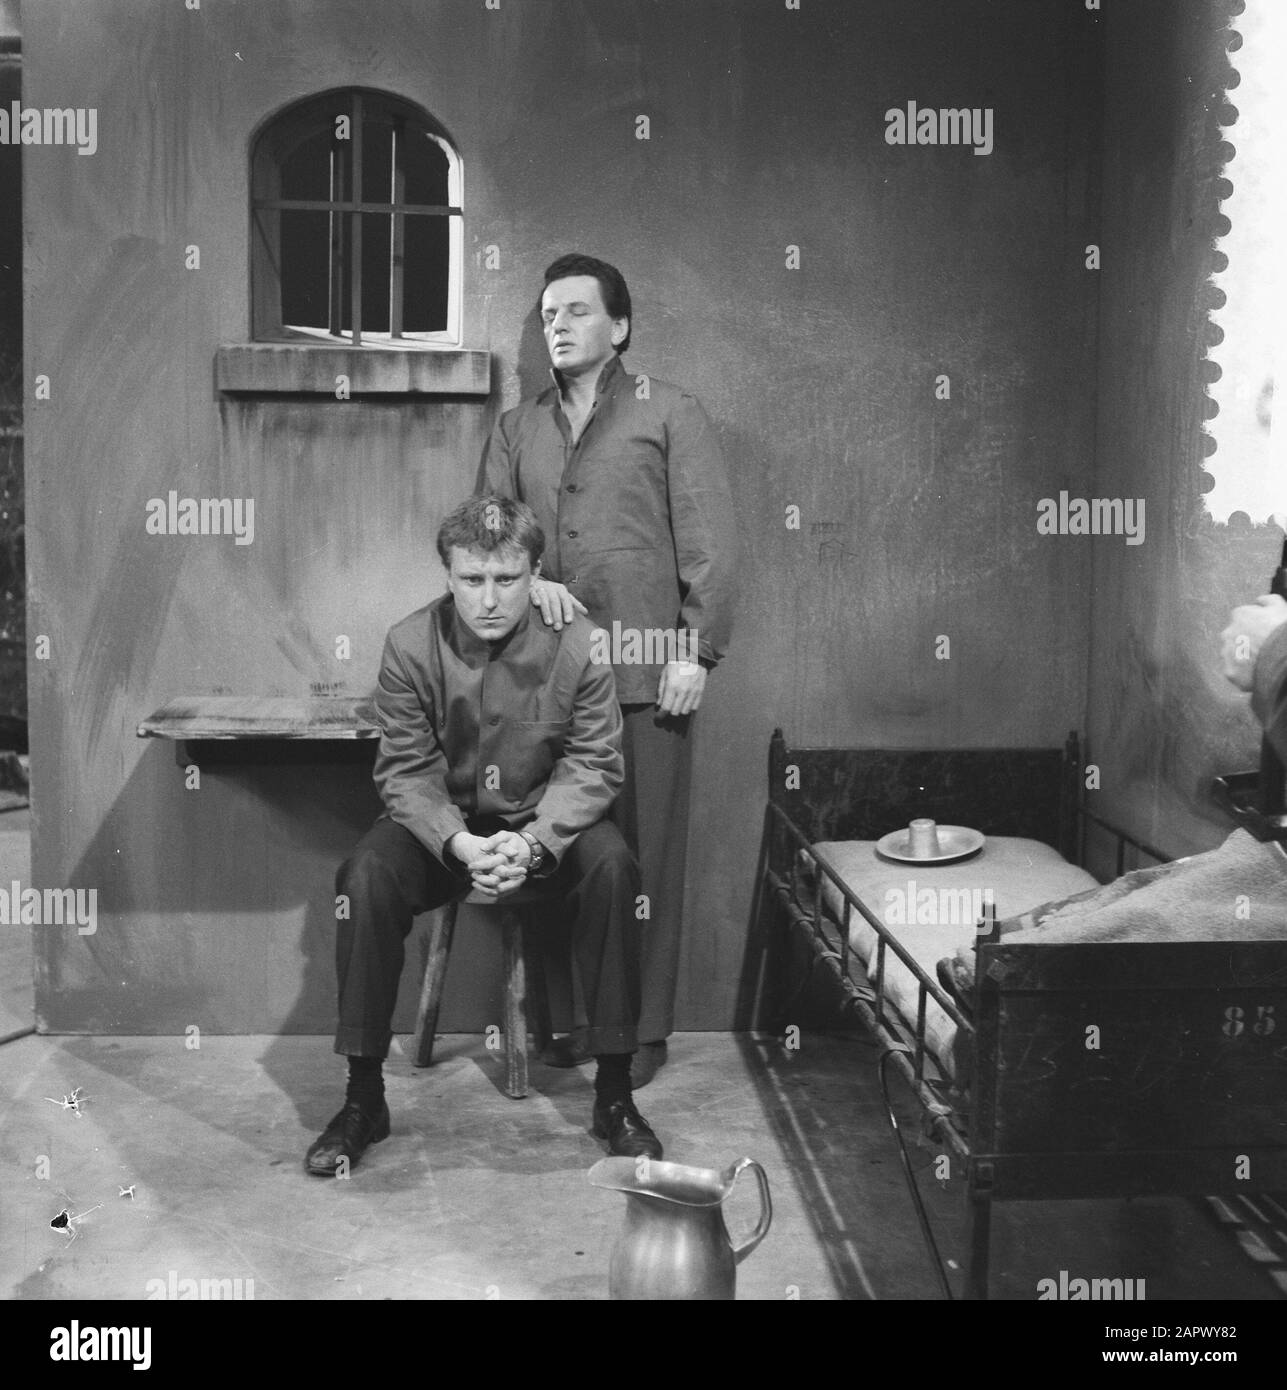 Television Game Night en Wrath, Rob de Vries (Jean and Peter Oosthoek (Lecocq) in the cell Date: May 3, 1960 Keywords: Television games Personal name: Jean, Lecocq, Peter Oosthoek, Vries, Rob the Stock Photo